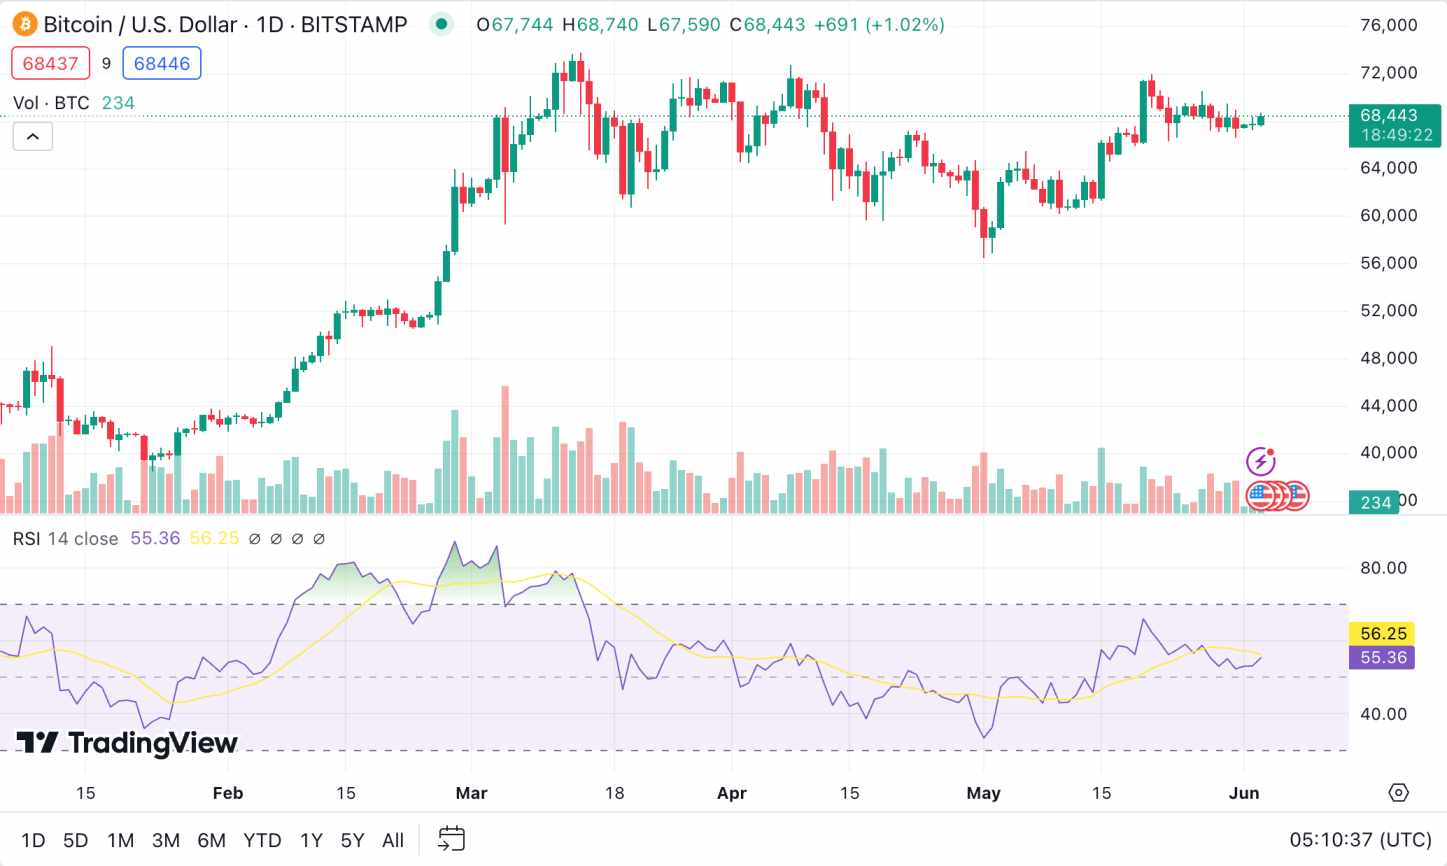 Relative Strength Index (RSI) for Bitcoin